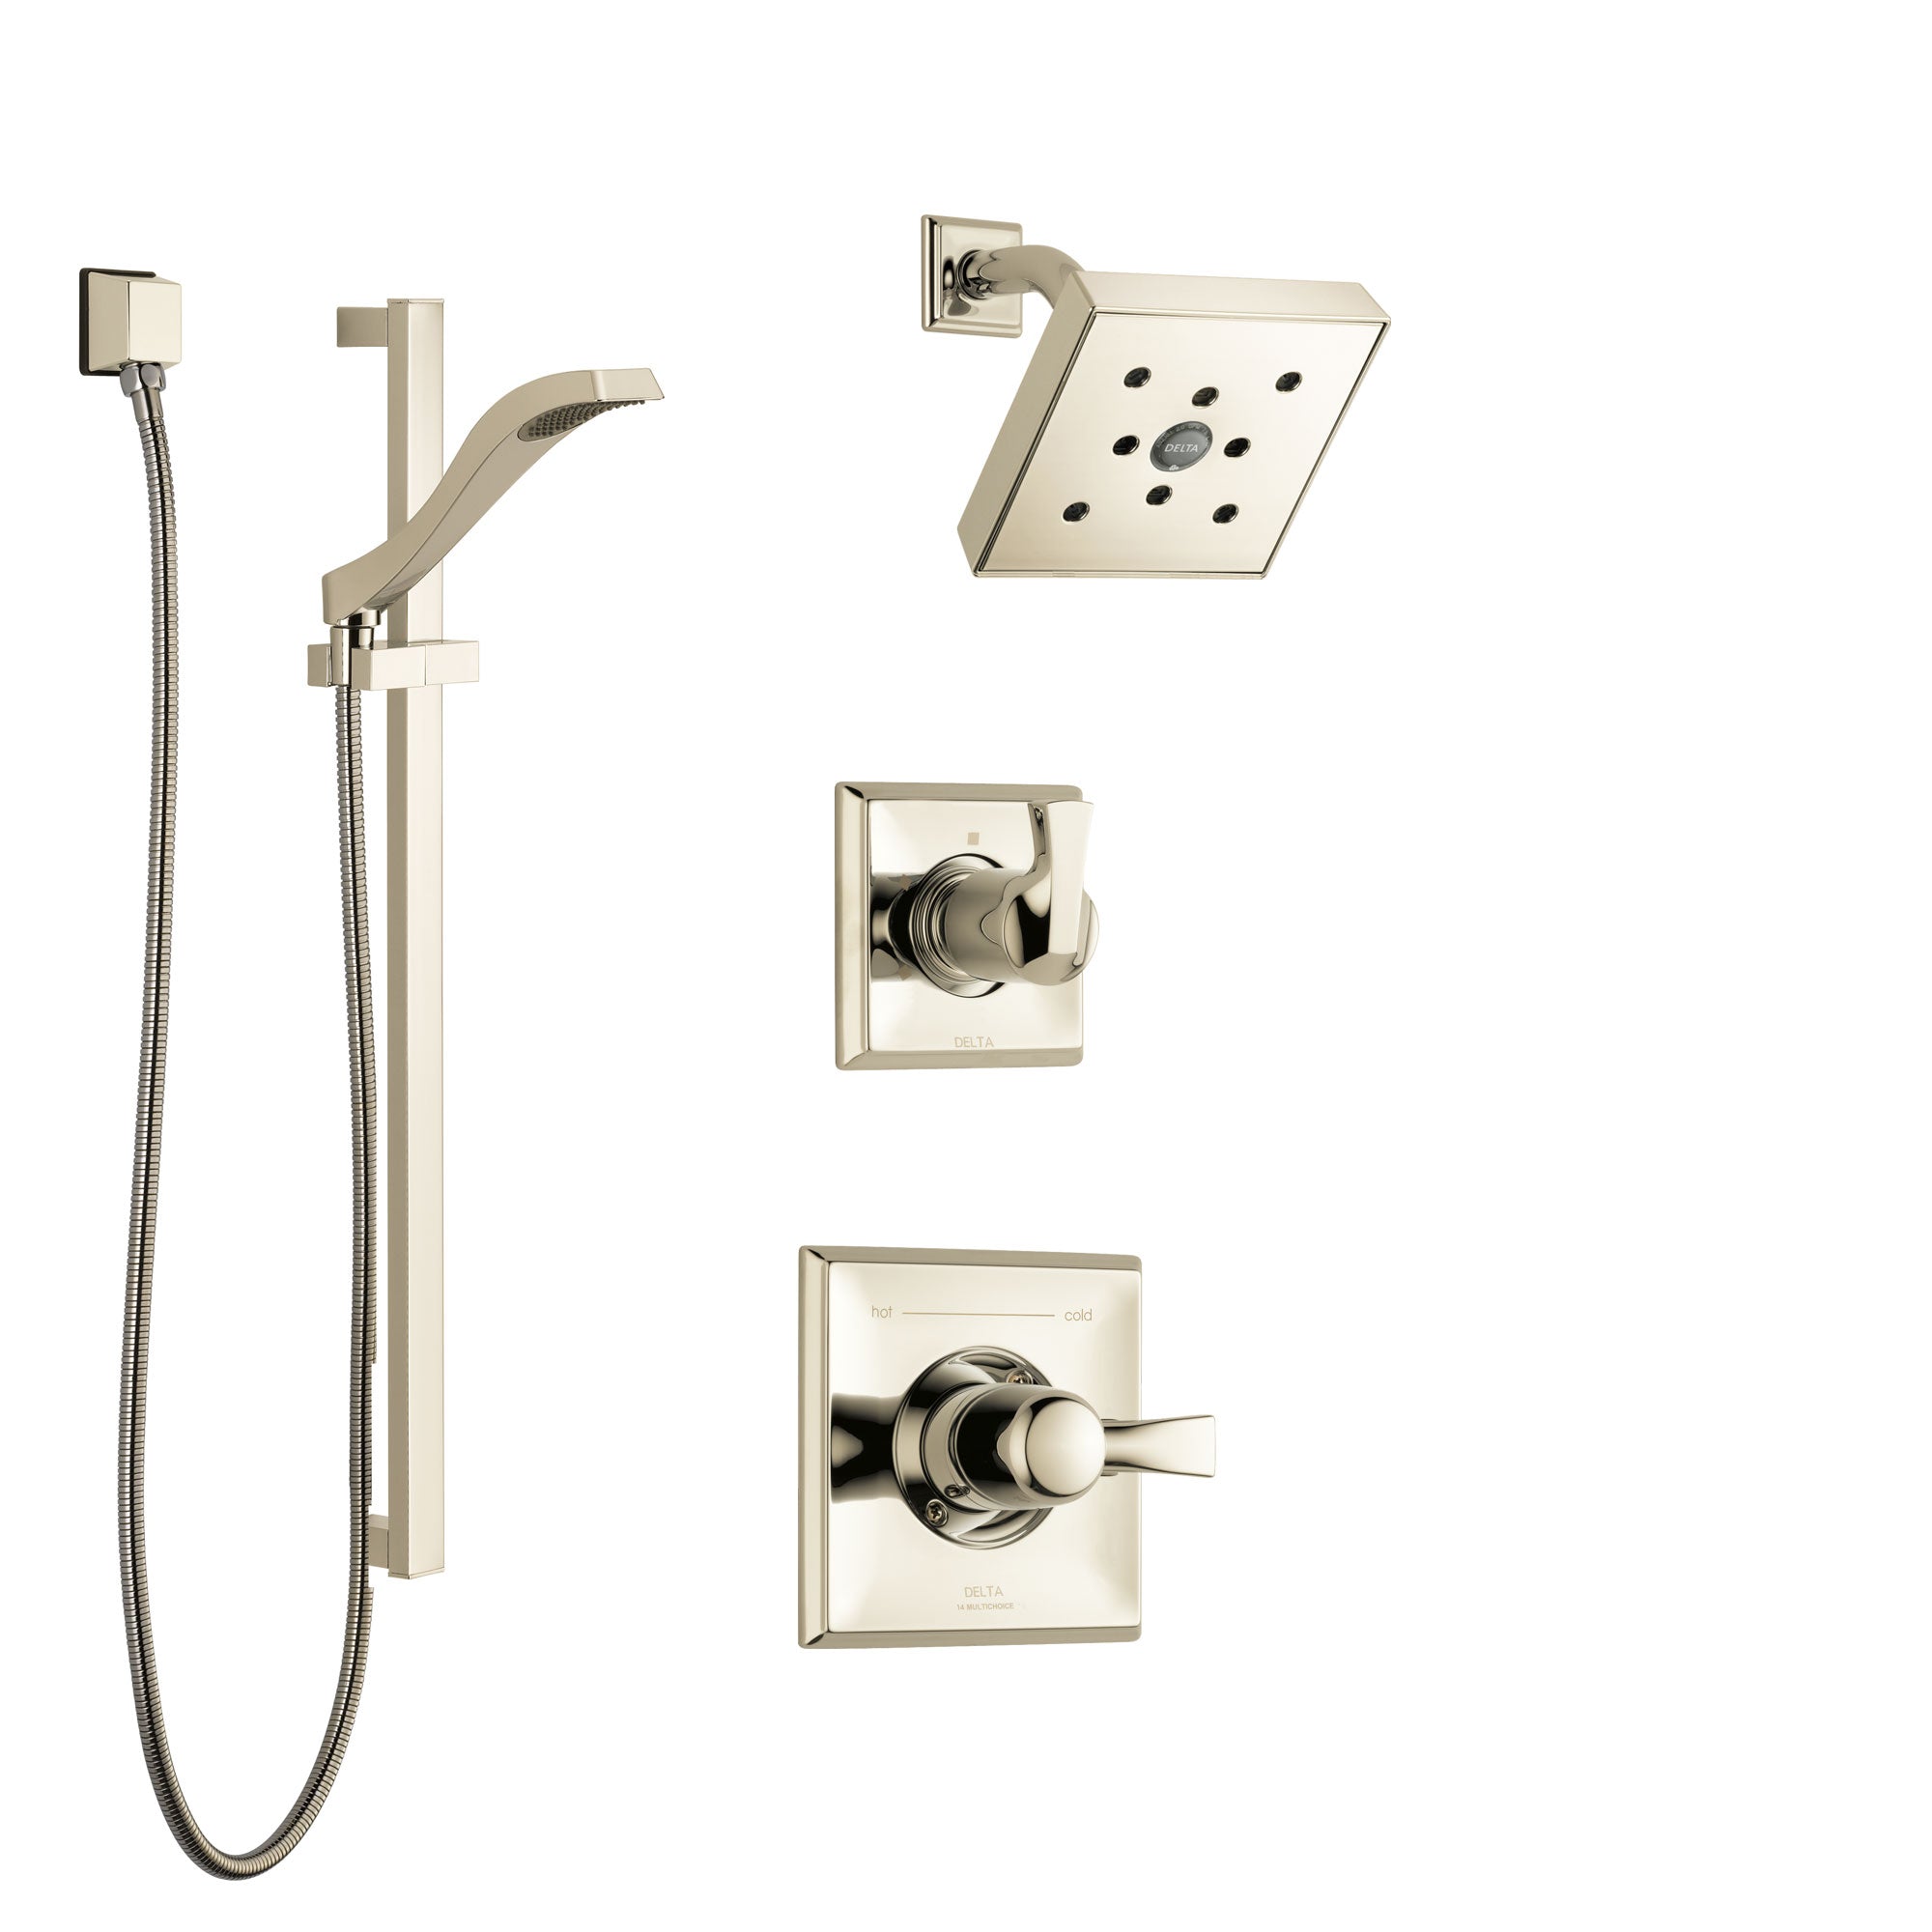 Delta Dryden Polished Nickel Finish Shower System with Control Handle, 3-Setting Diverter, Showerhead, and Hand Shower with Slidebar SS142512PN2